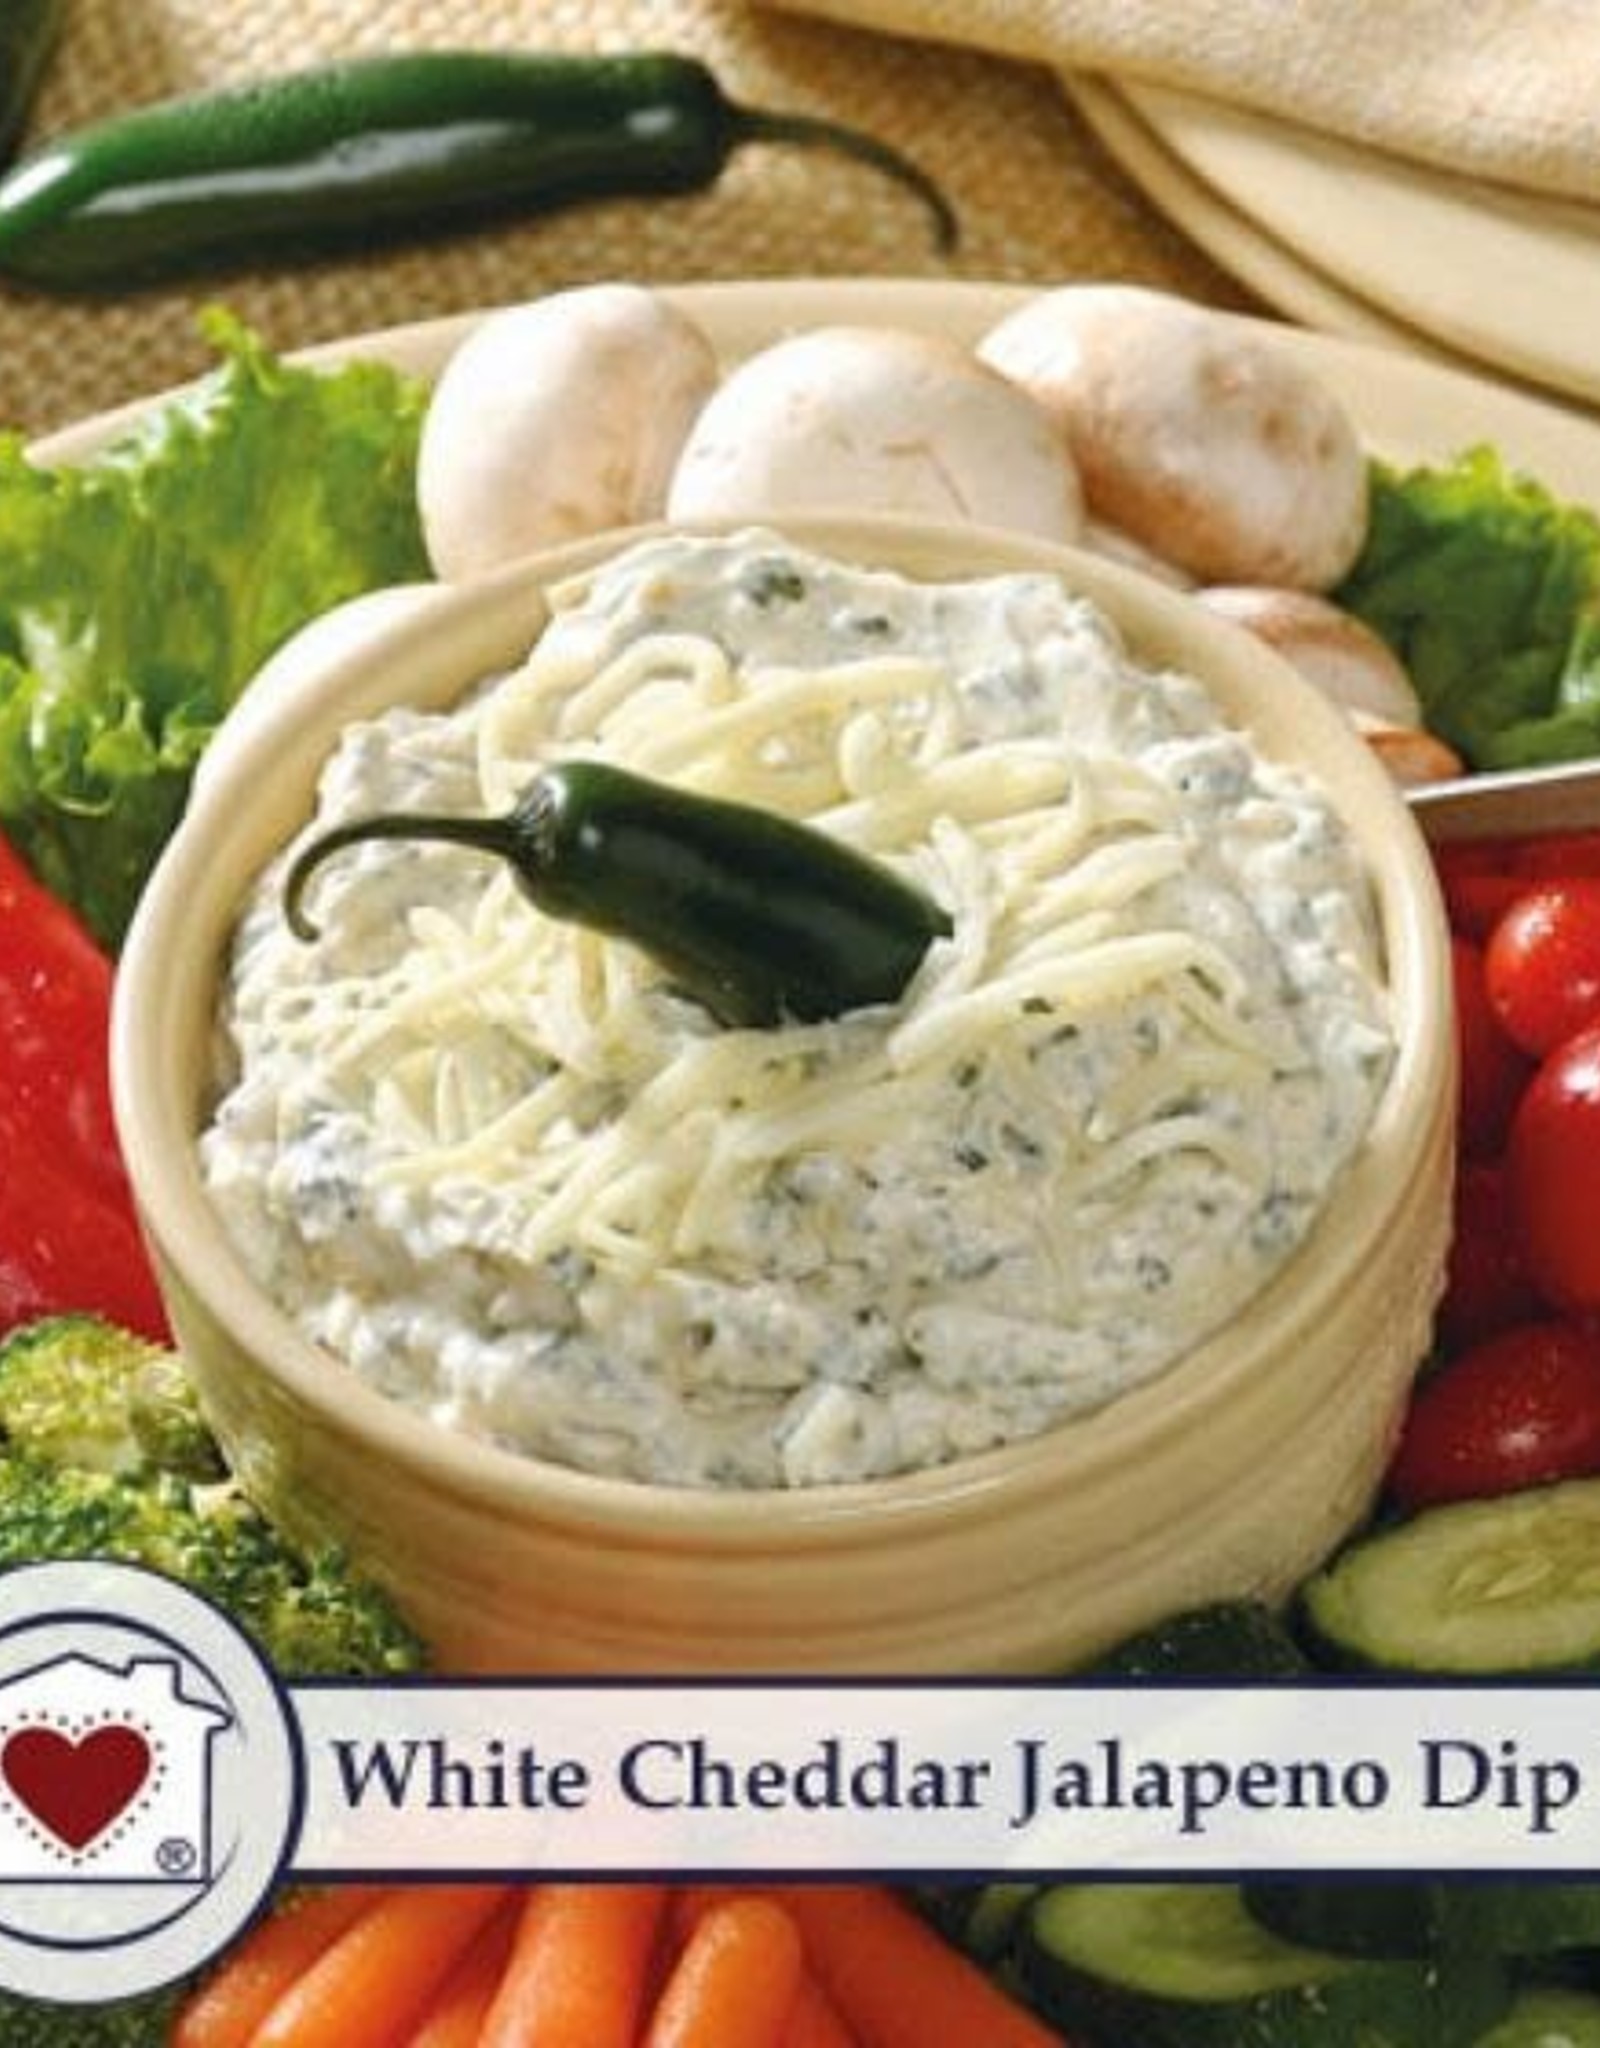 Country Home Creations WHITE CHEDDAR JALAPENO DIP MIX